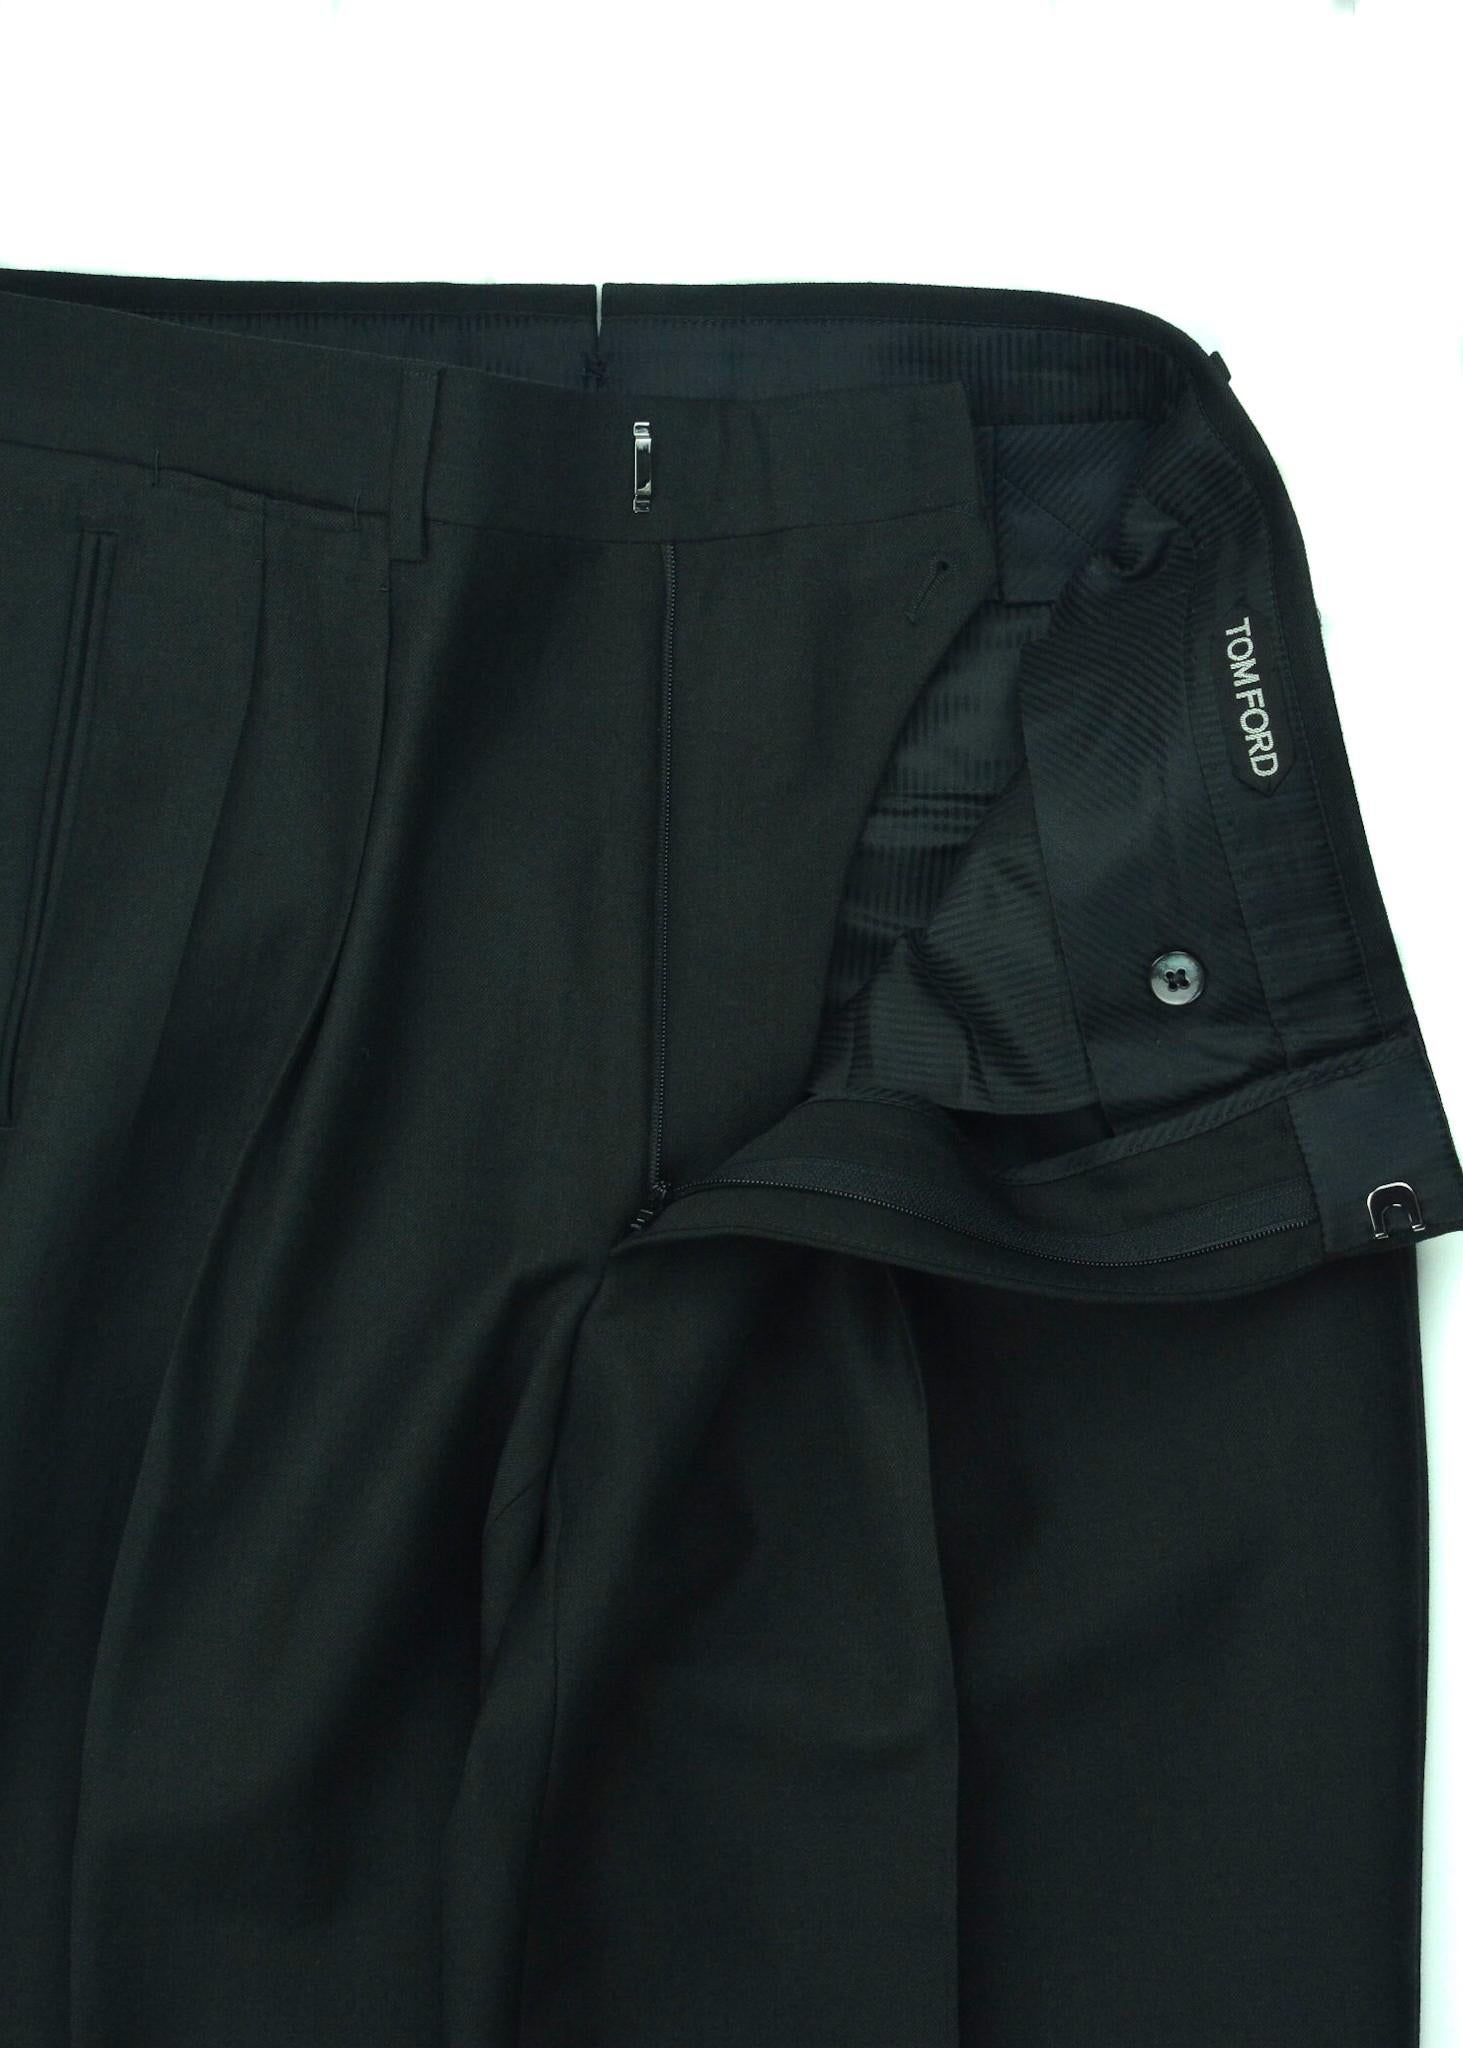 tom ford mens trousers